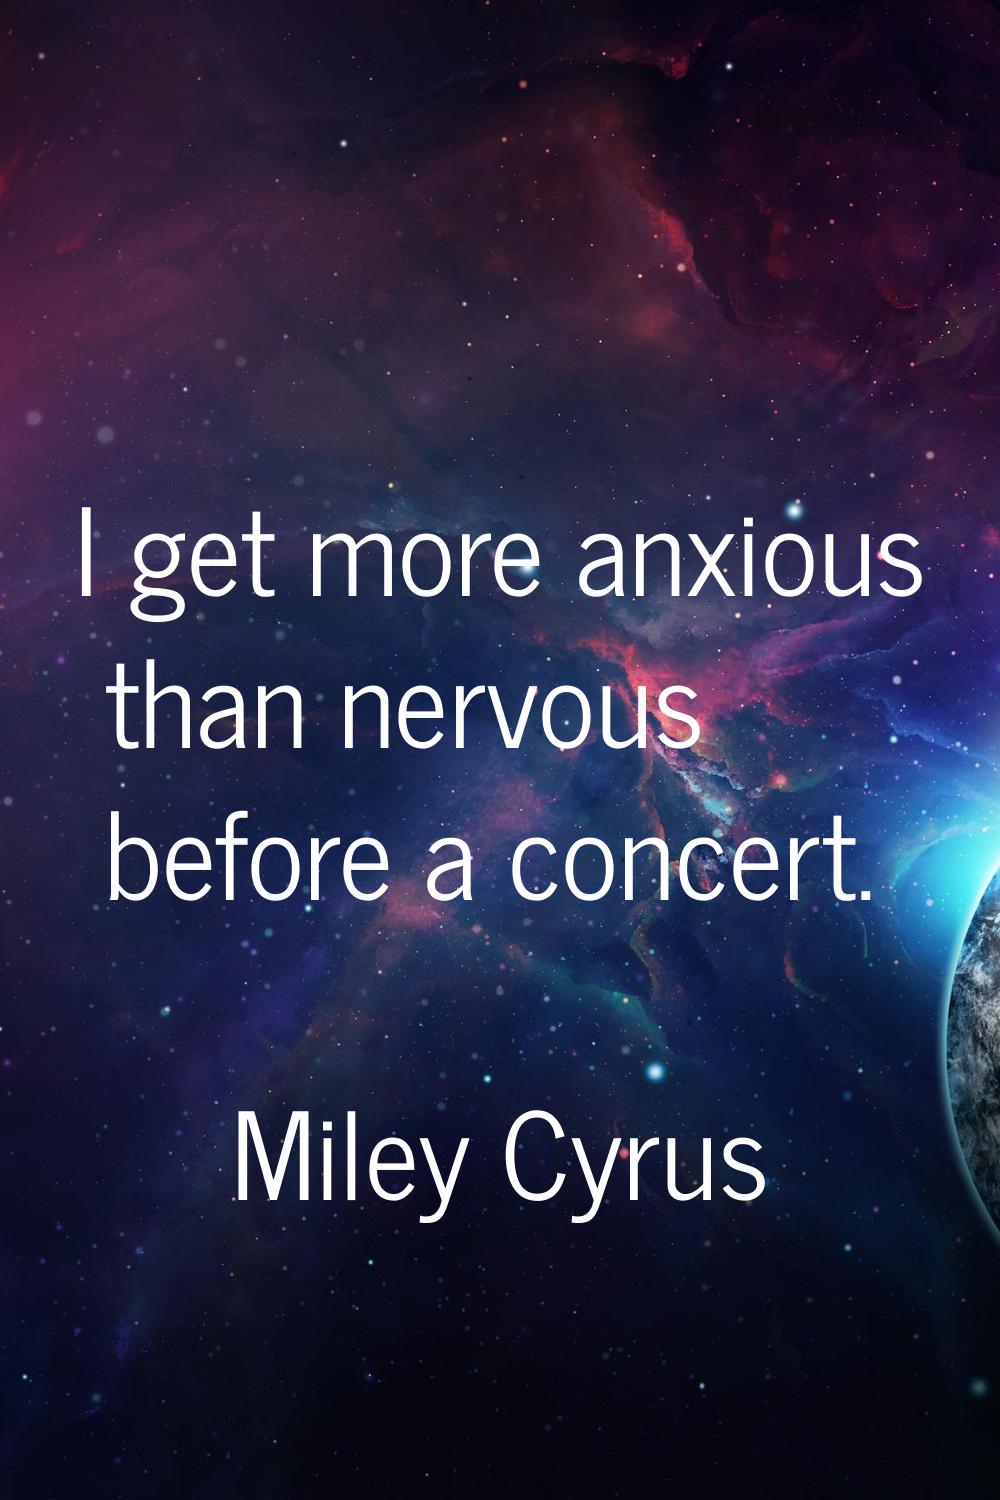 I get more anxious than nervous before a concert.